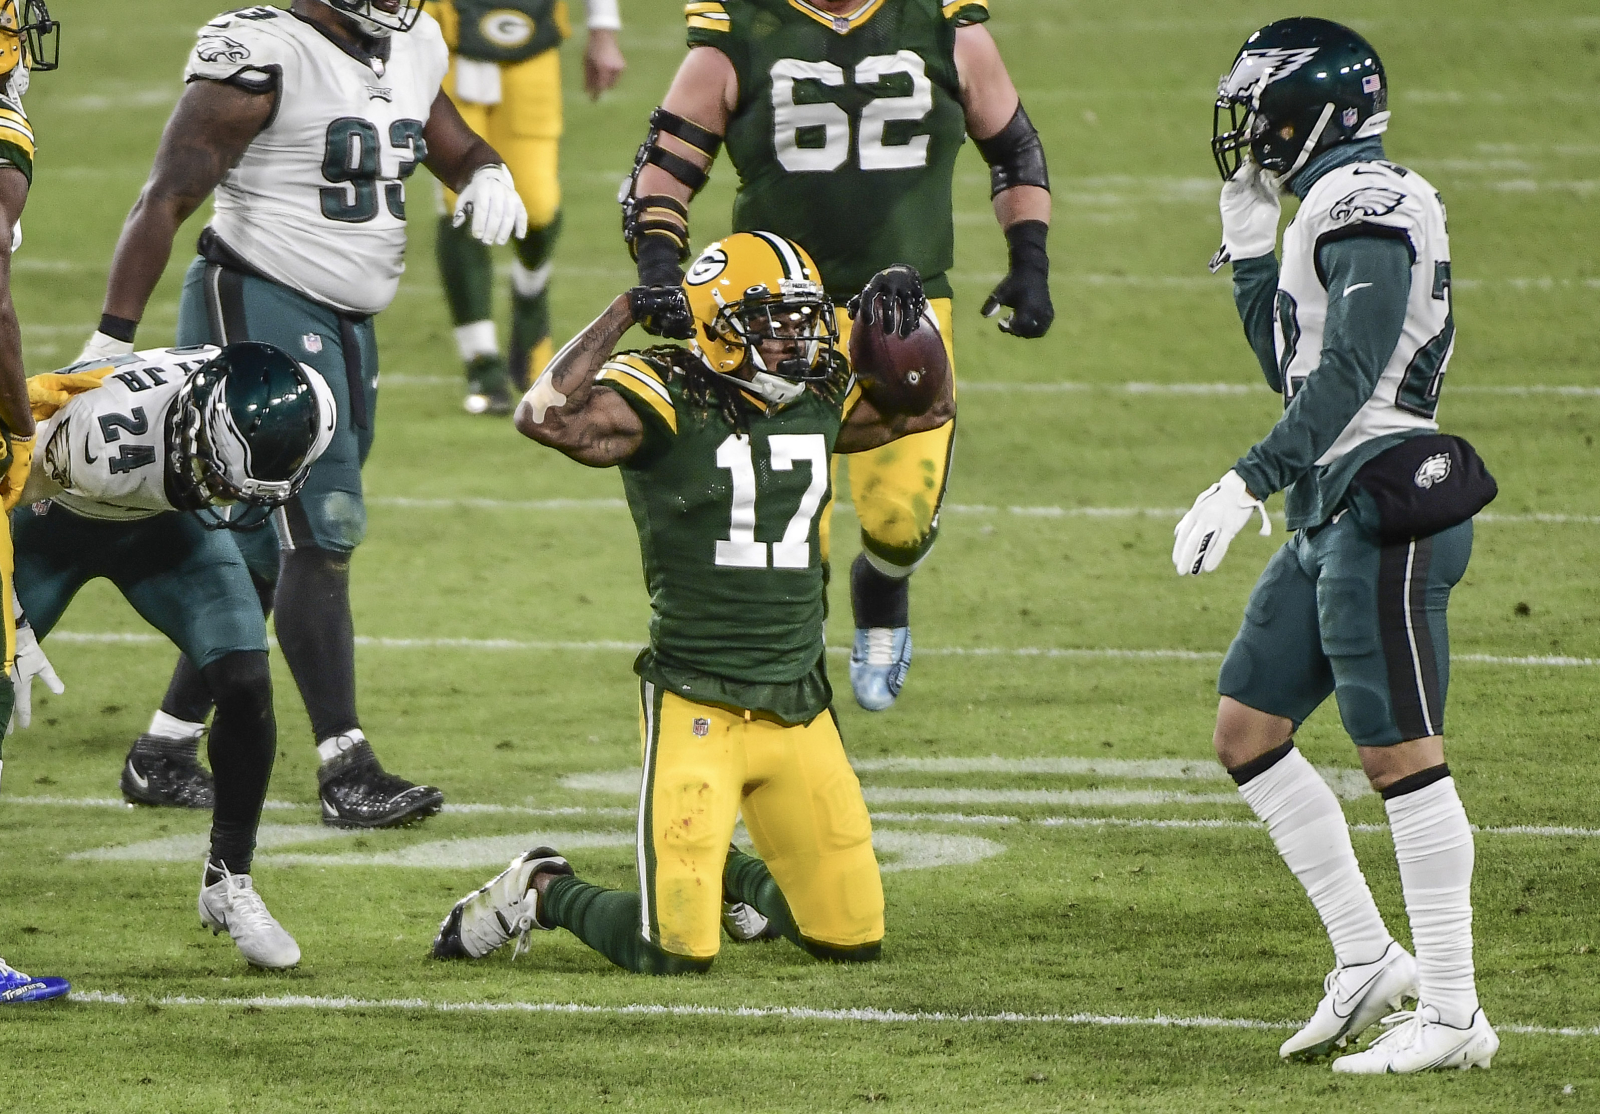 PFF ranks Davante Adams as the fourth best player in the NFL